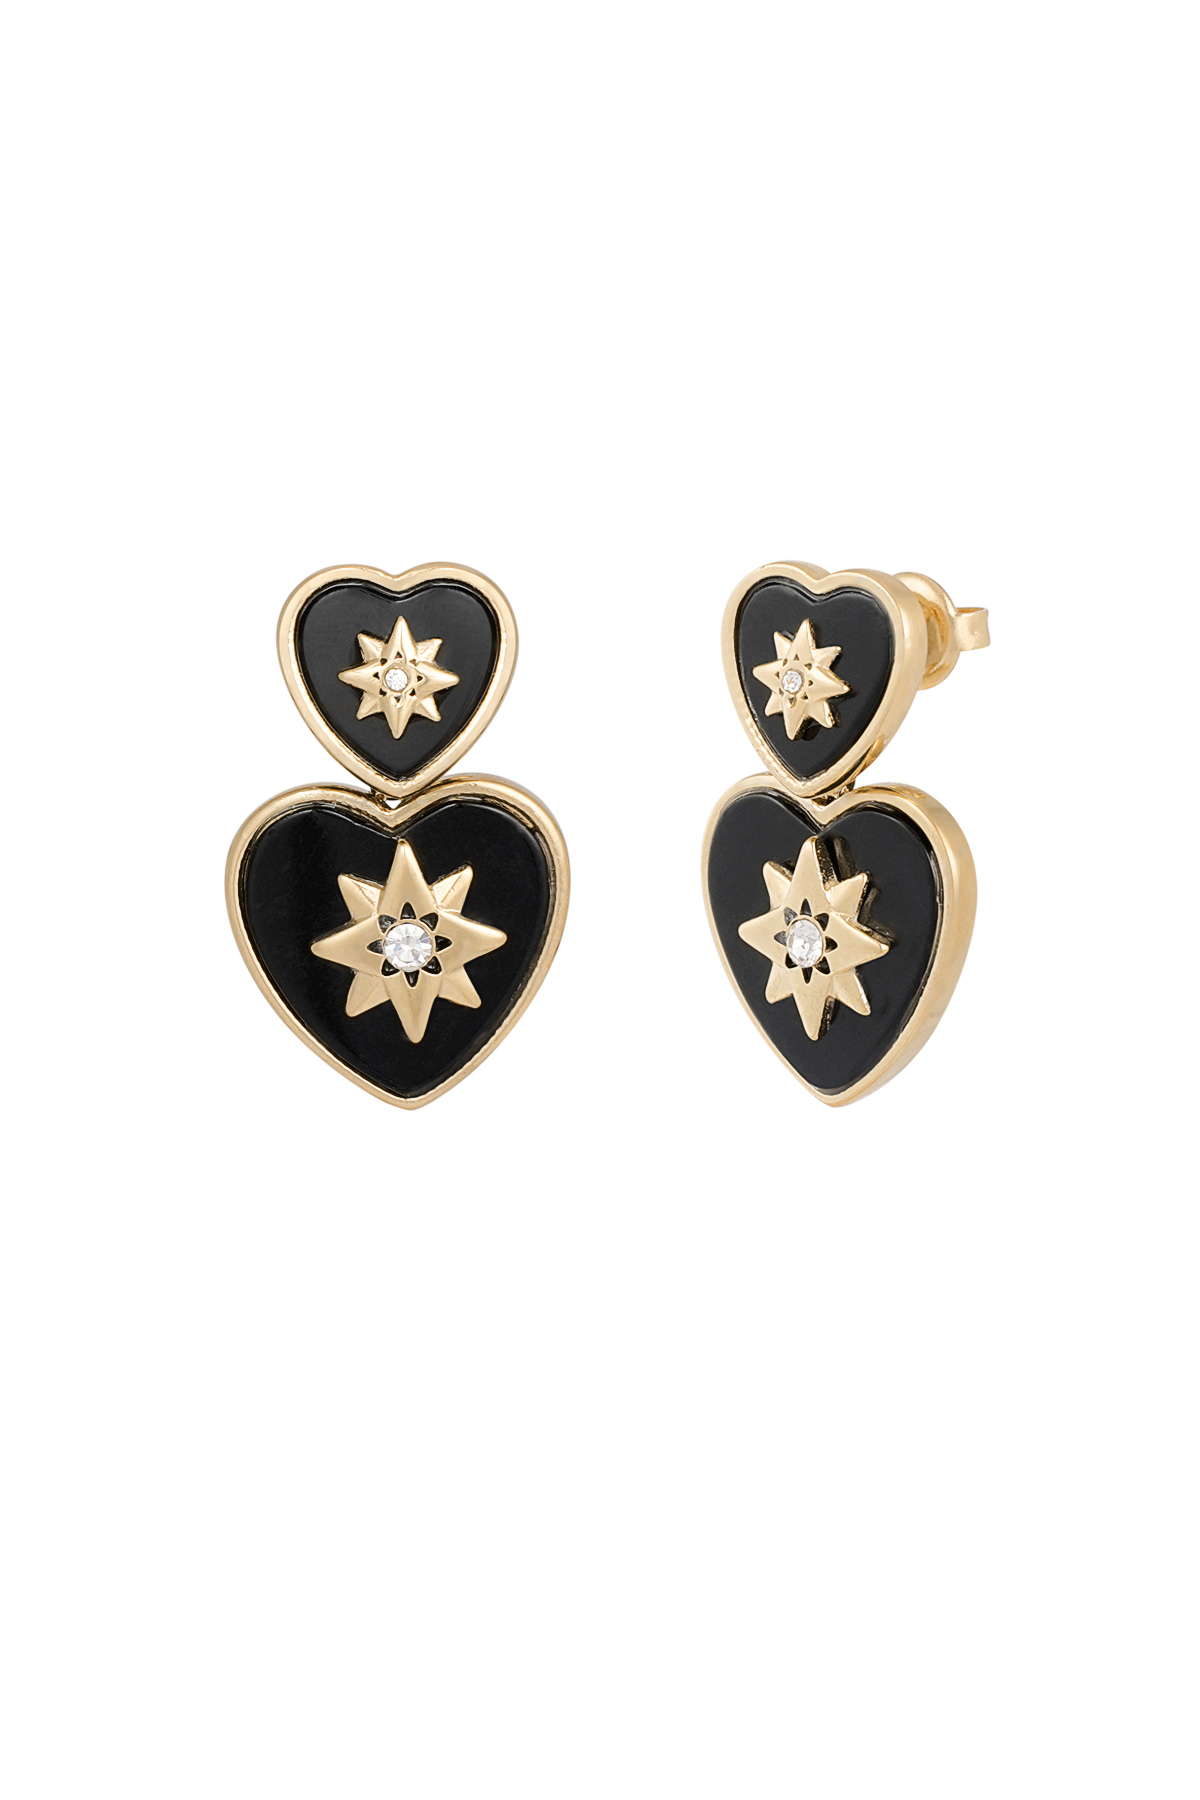 Heart earrings with compass - black gold h5 